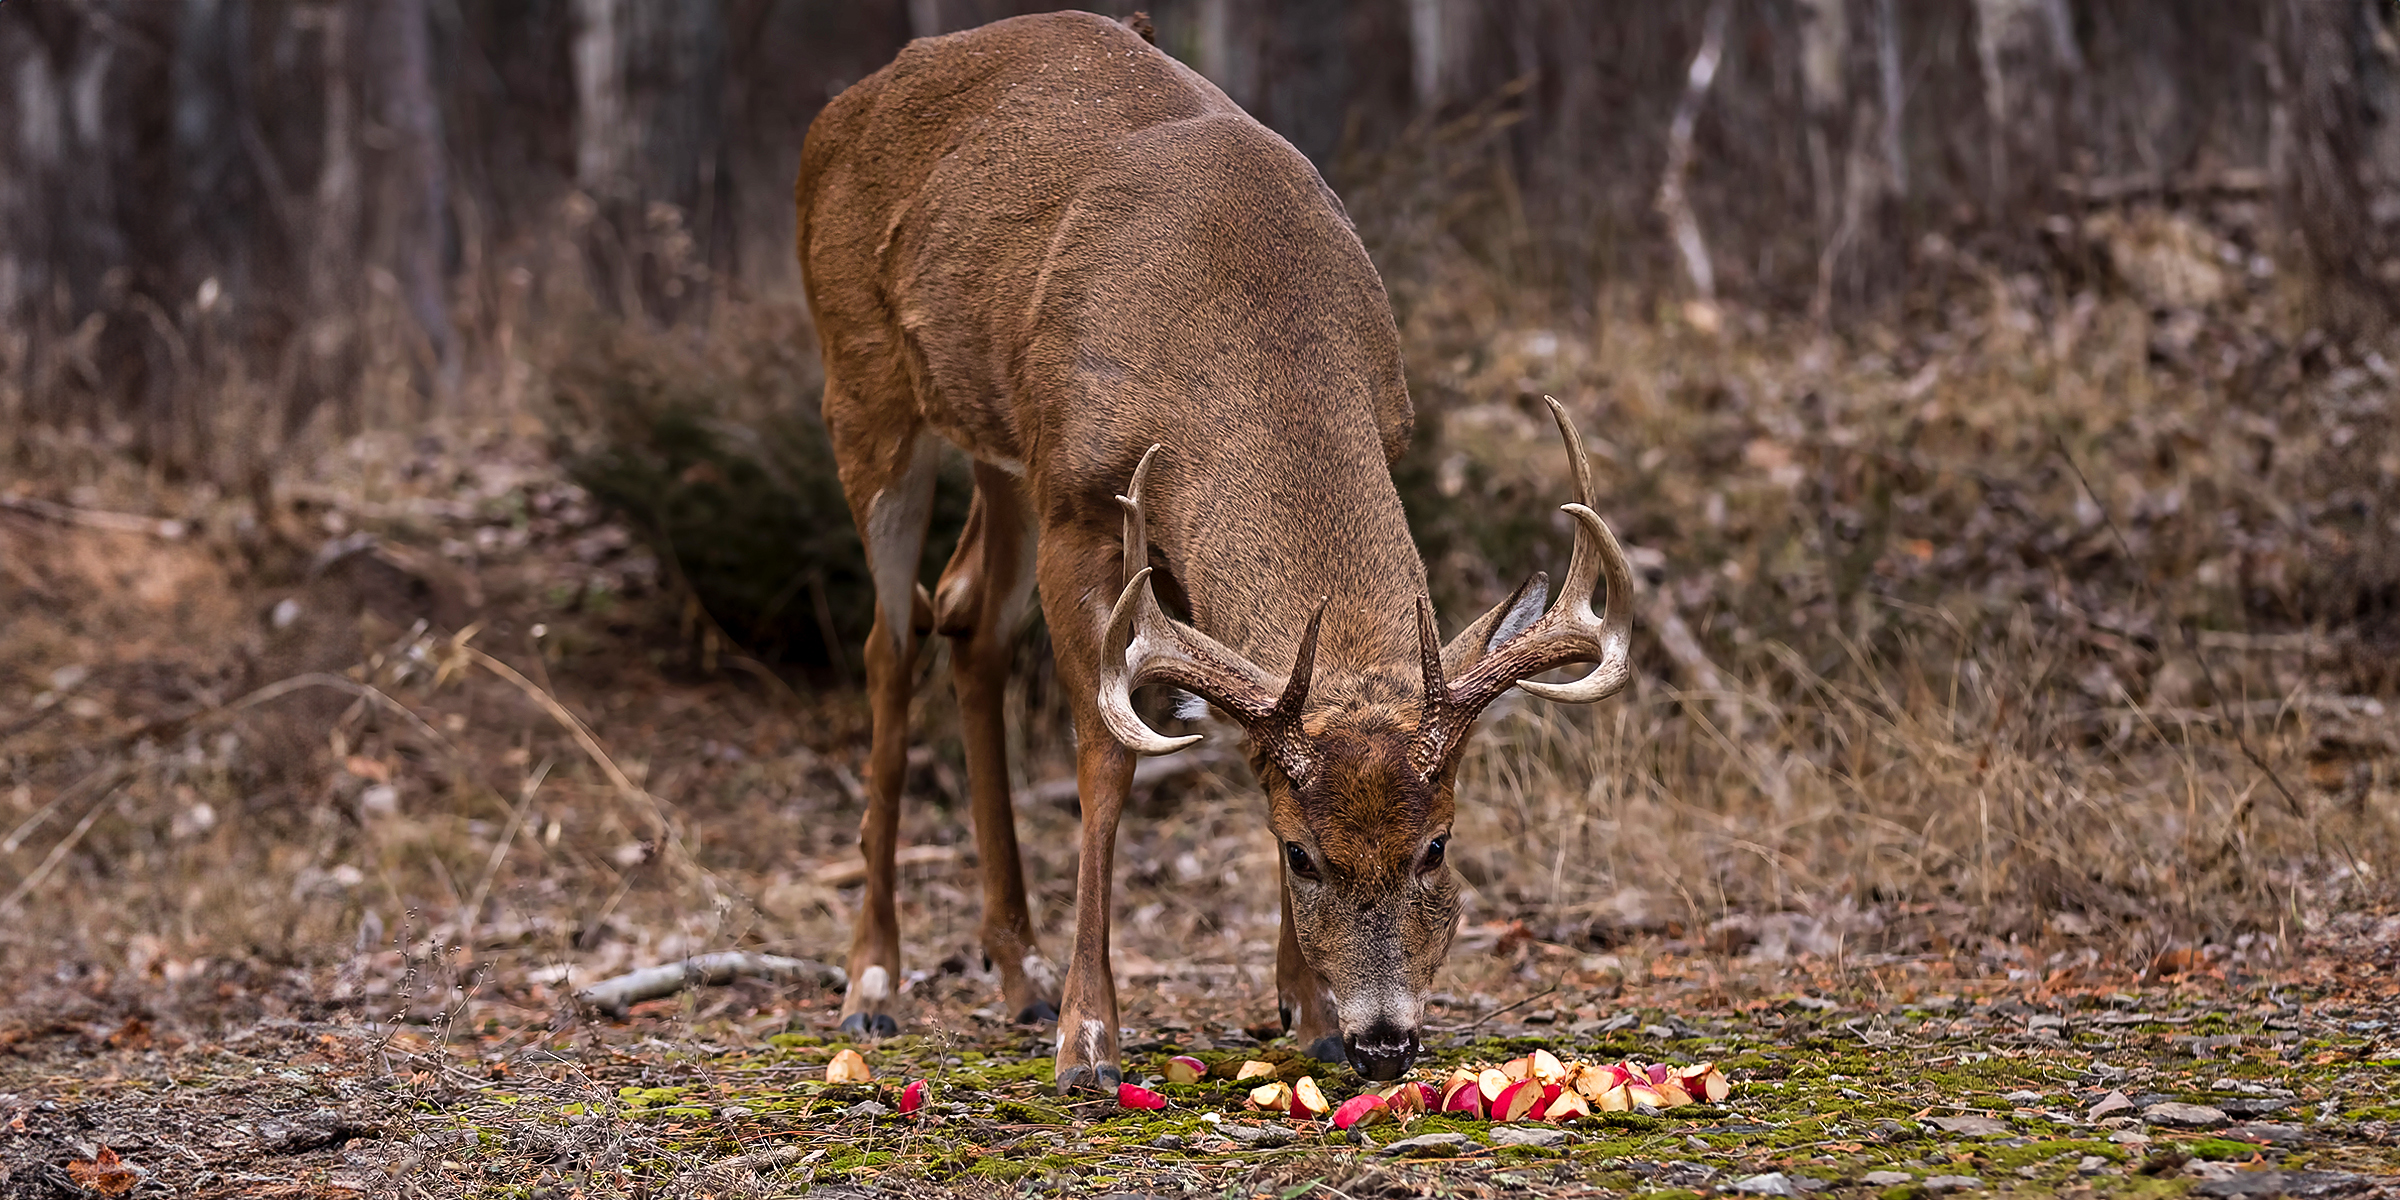 A deer eating fruit on the ground | Source: Shutterstock